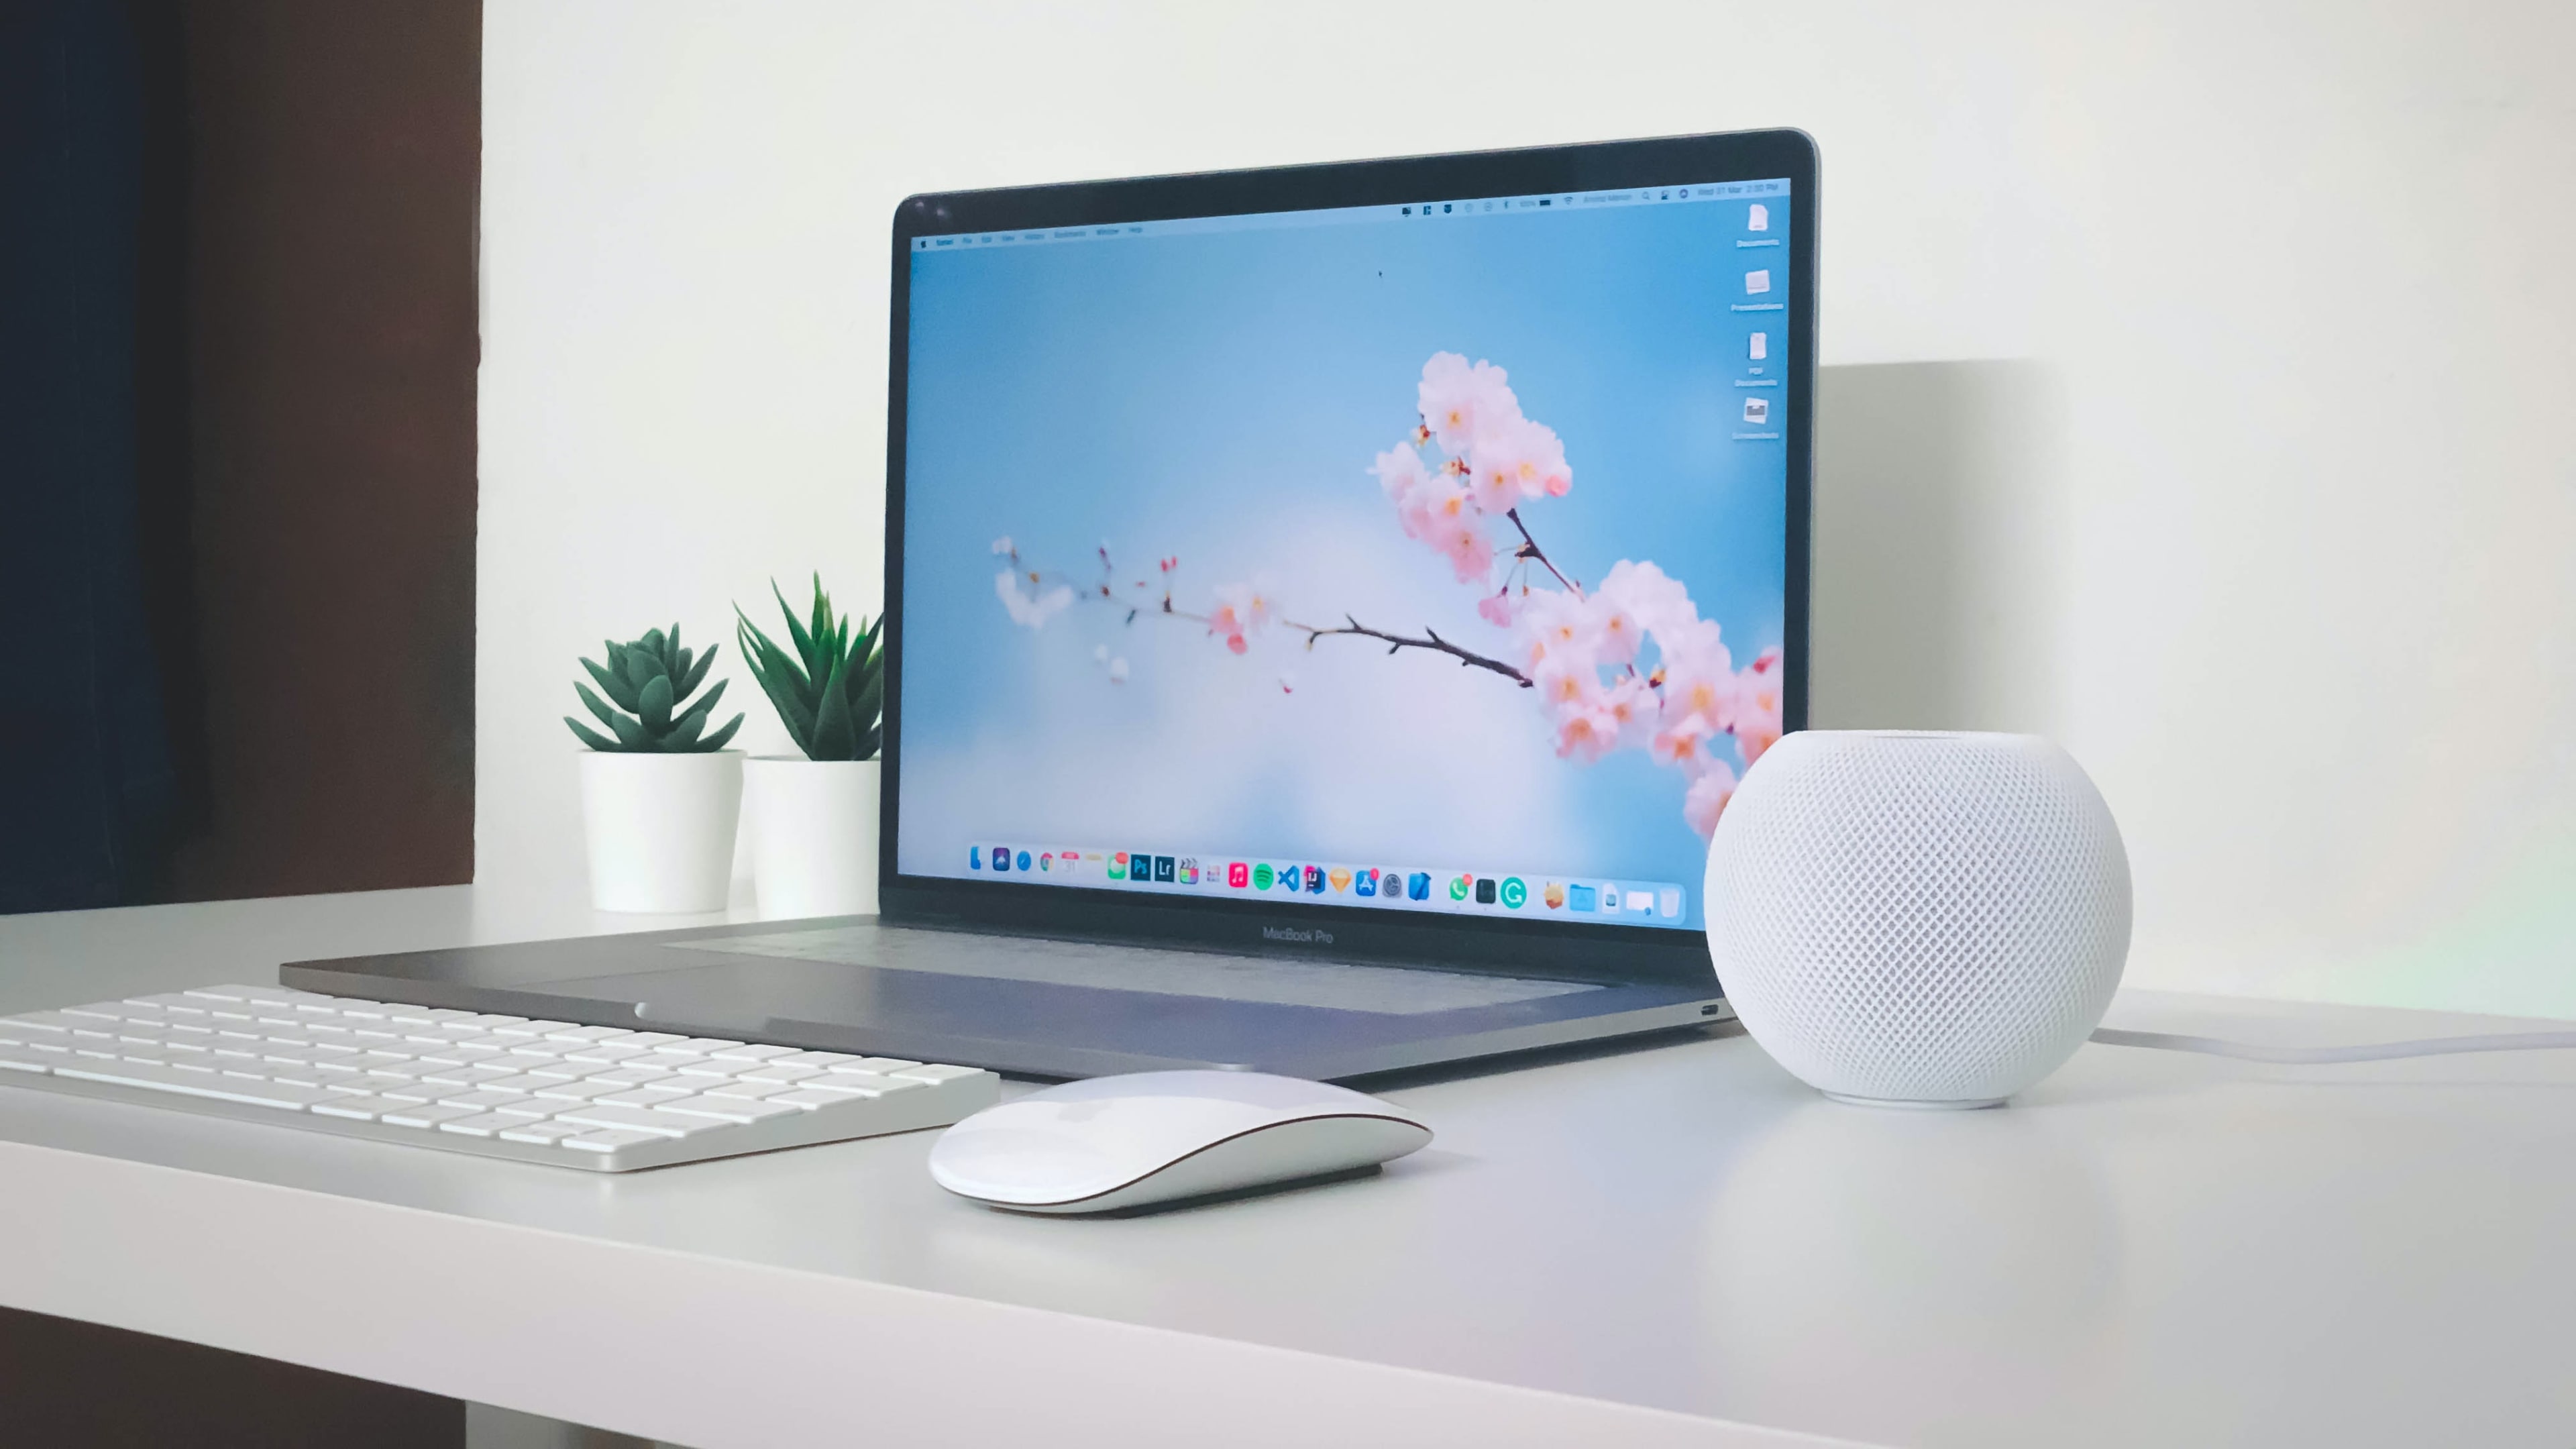 HomePod mini on a work desk next to MacBook Pro and Apple keyboard and mouse